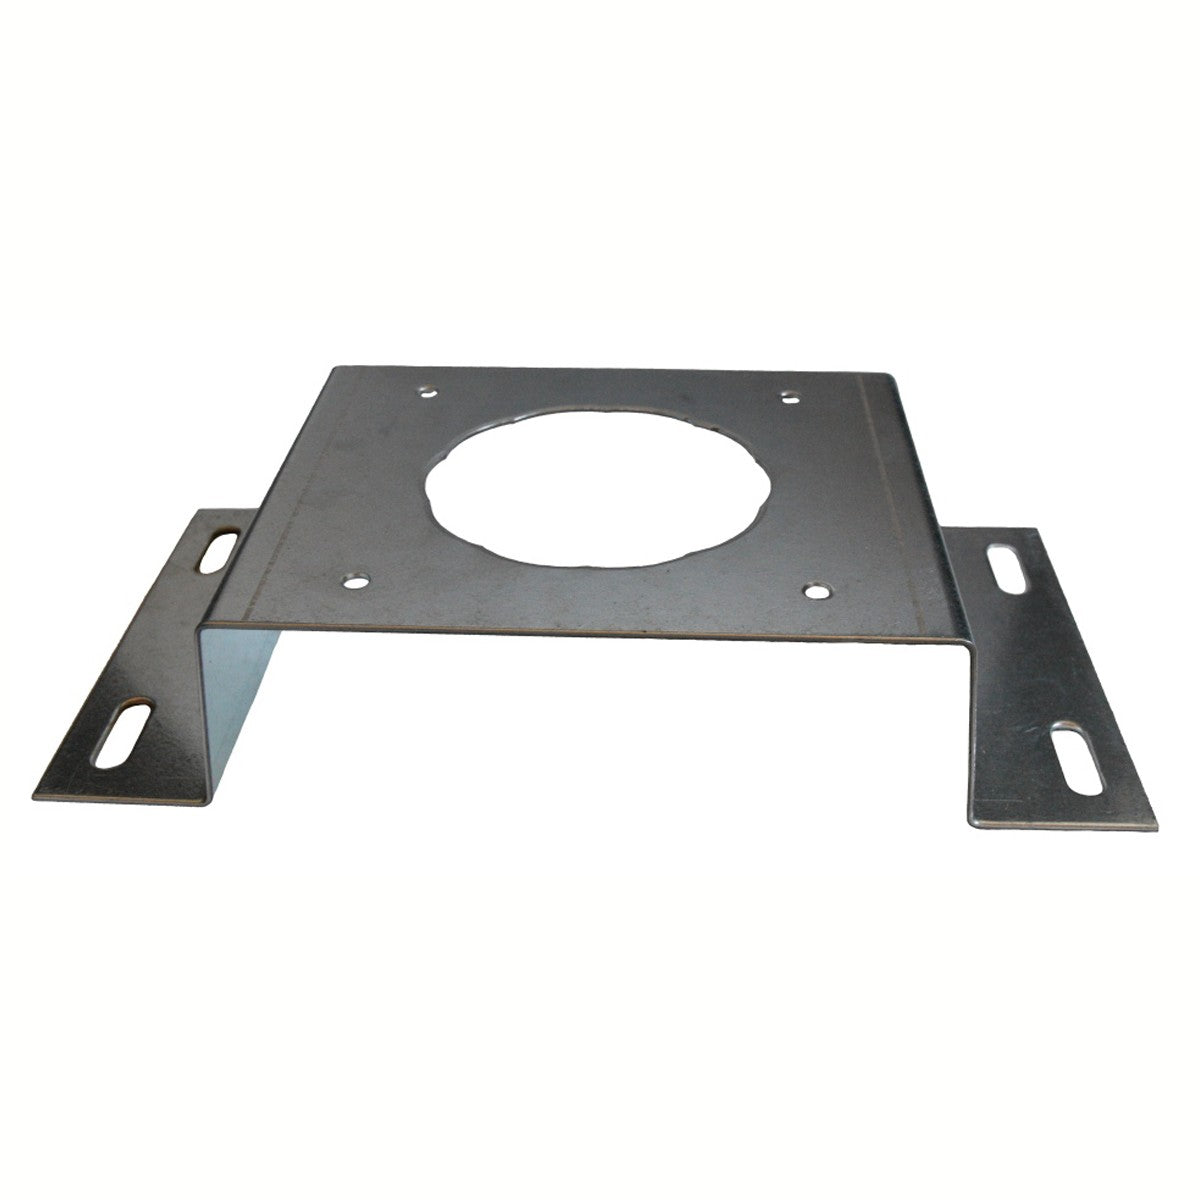 Pulley and Motor Bracket Kit for Belt Drive Whole House Fans